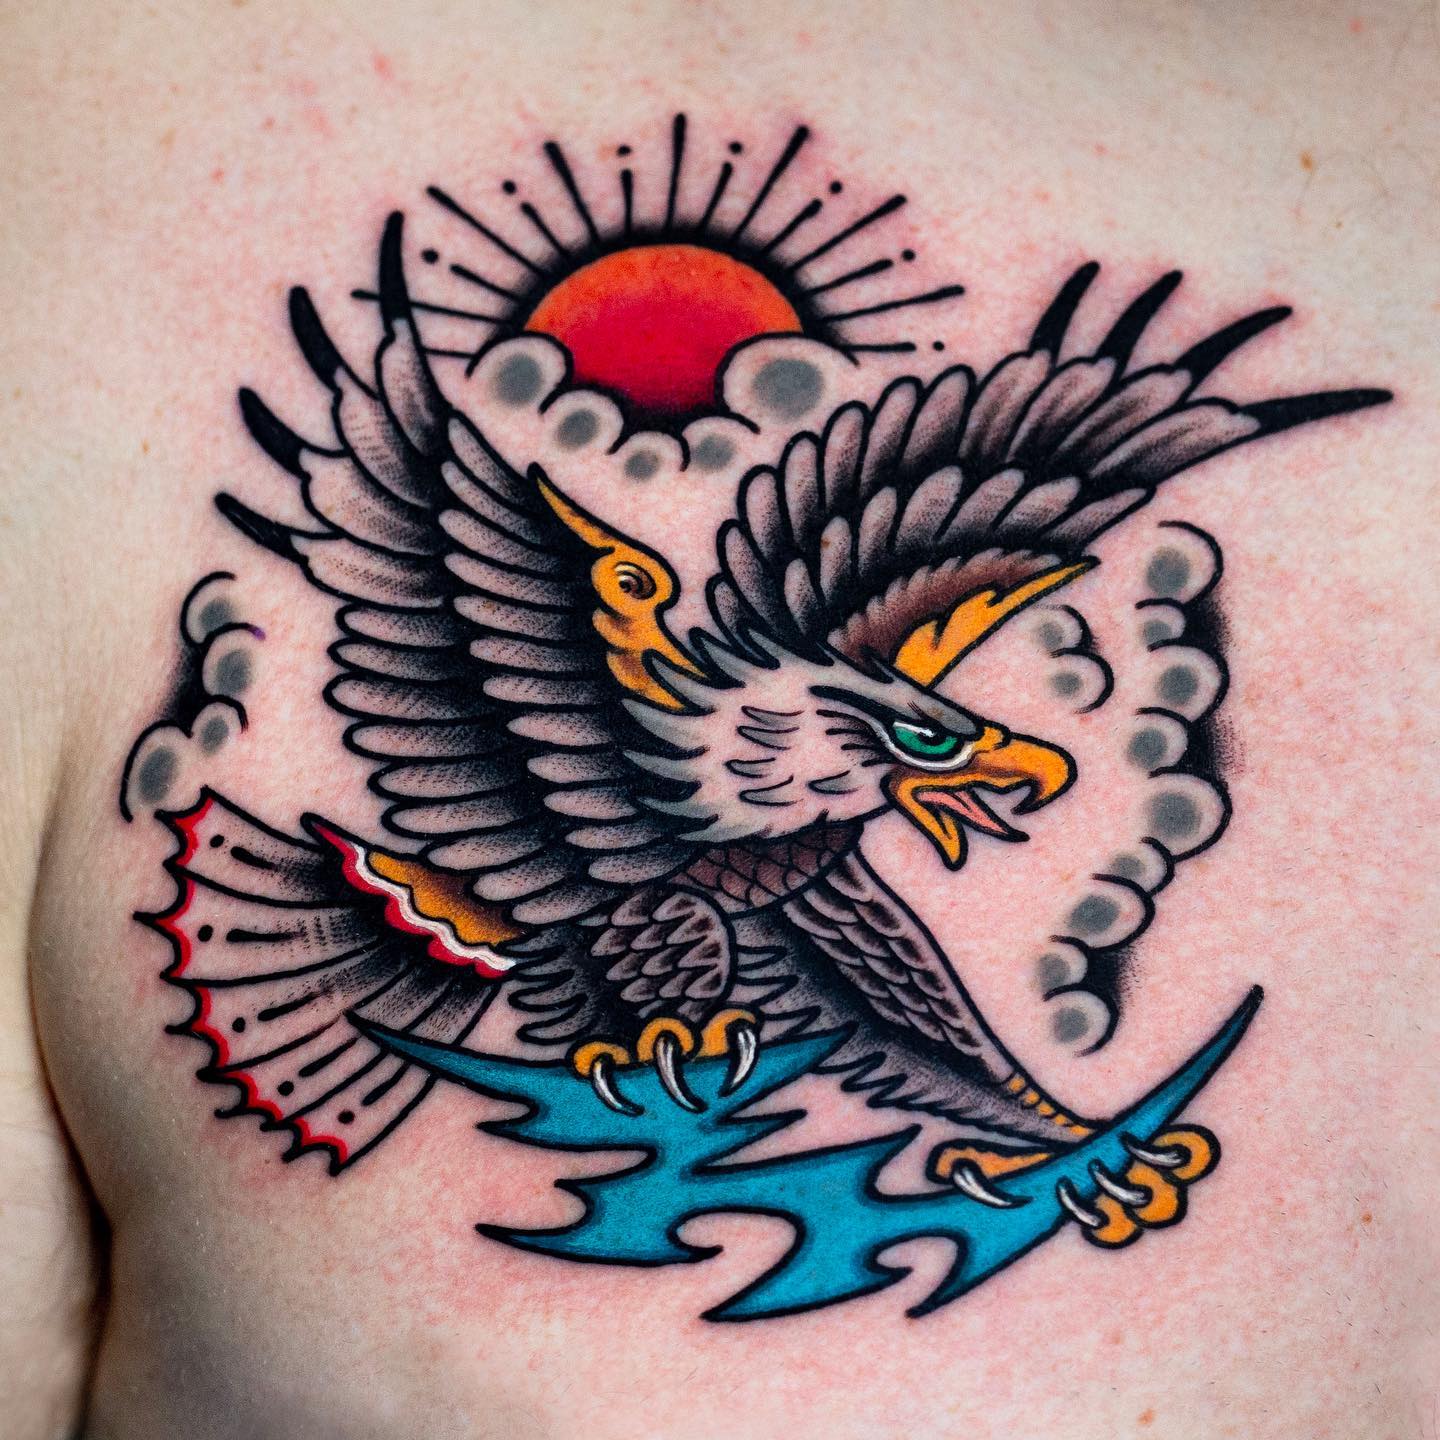 Neo traditional eagle tattoo design by miguelcomintattooer